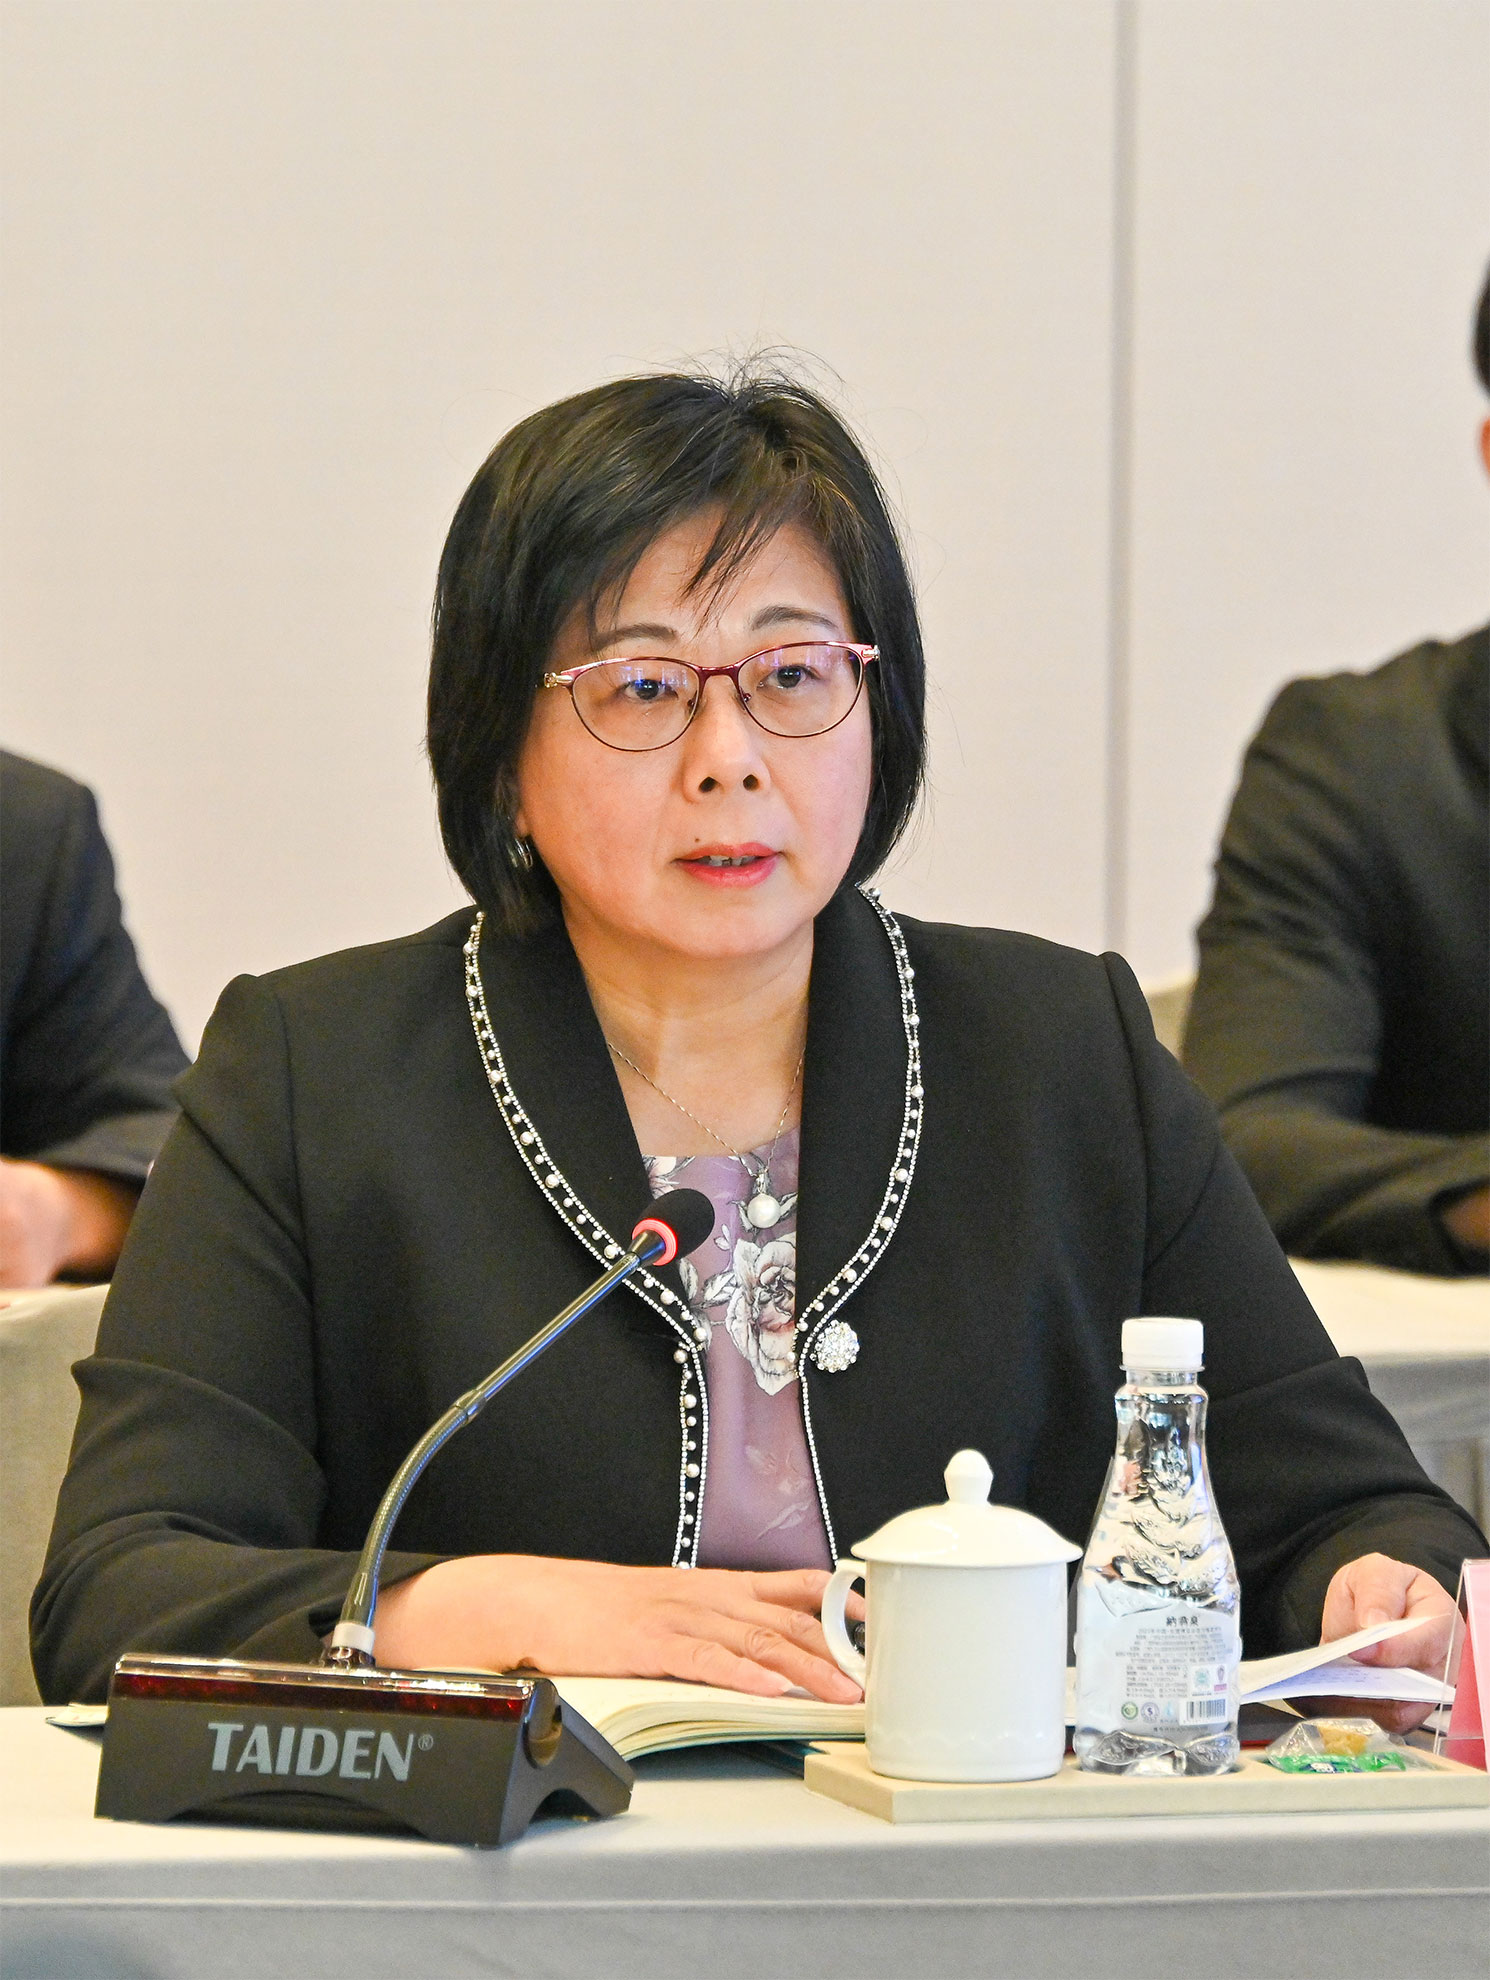 The Deputy Secretary for Justice, Mr Cheung Kwok-kwan, and a delegation of young lawyers led by him today (November 17) finished the first stop, Shenzhen, of their visit to Mainland cities of the Greater Bay Area. Photo shows the Director of the Justice Bureau of Shenzhen Municipality, Ms Jiang Xiaowen, speaking at the discussion session during the delegation's visit to the Bureau.